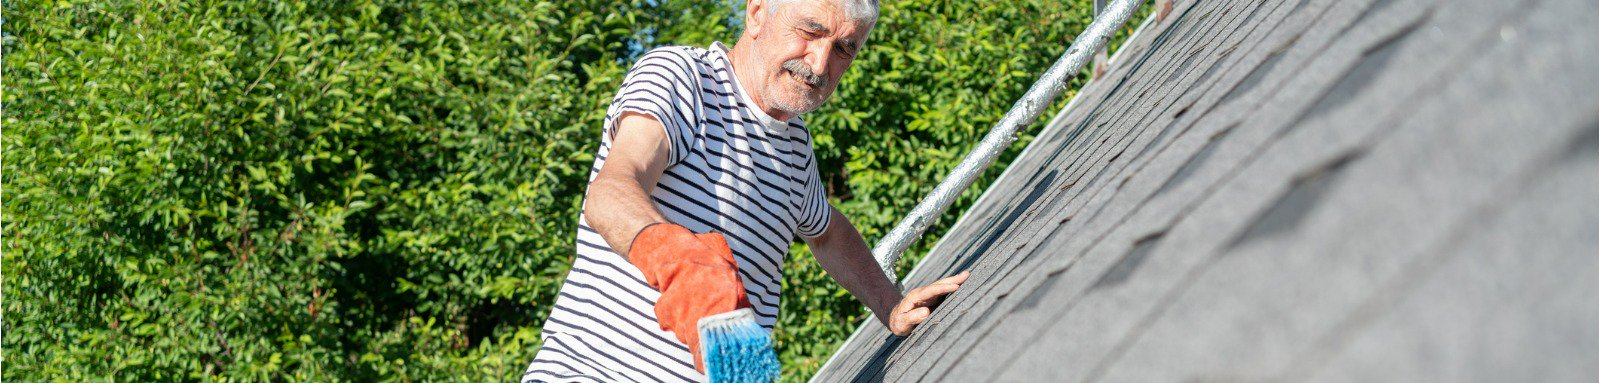 Senior man cleaning roof gutters